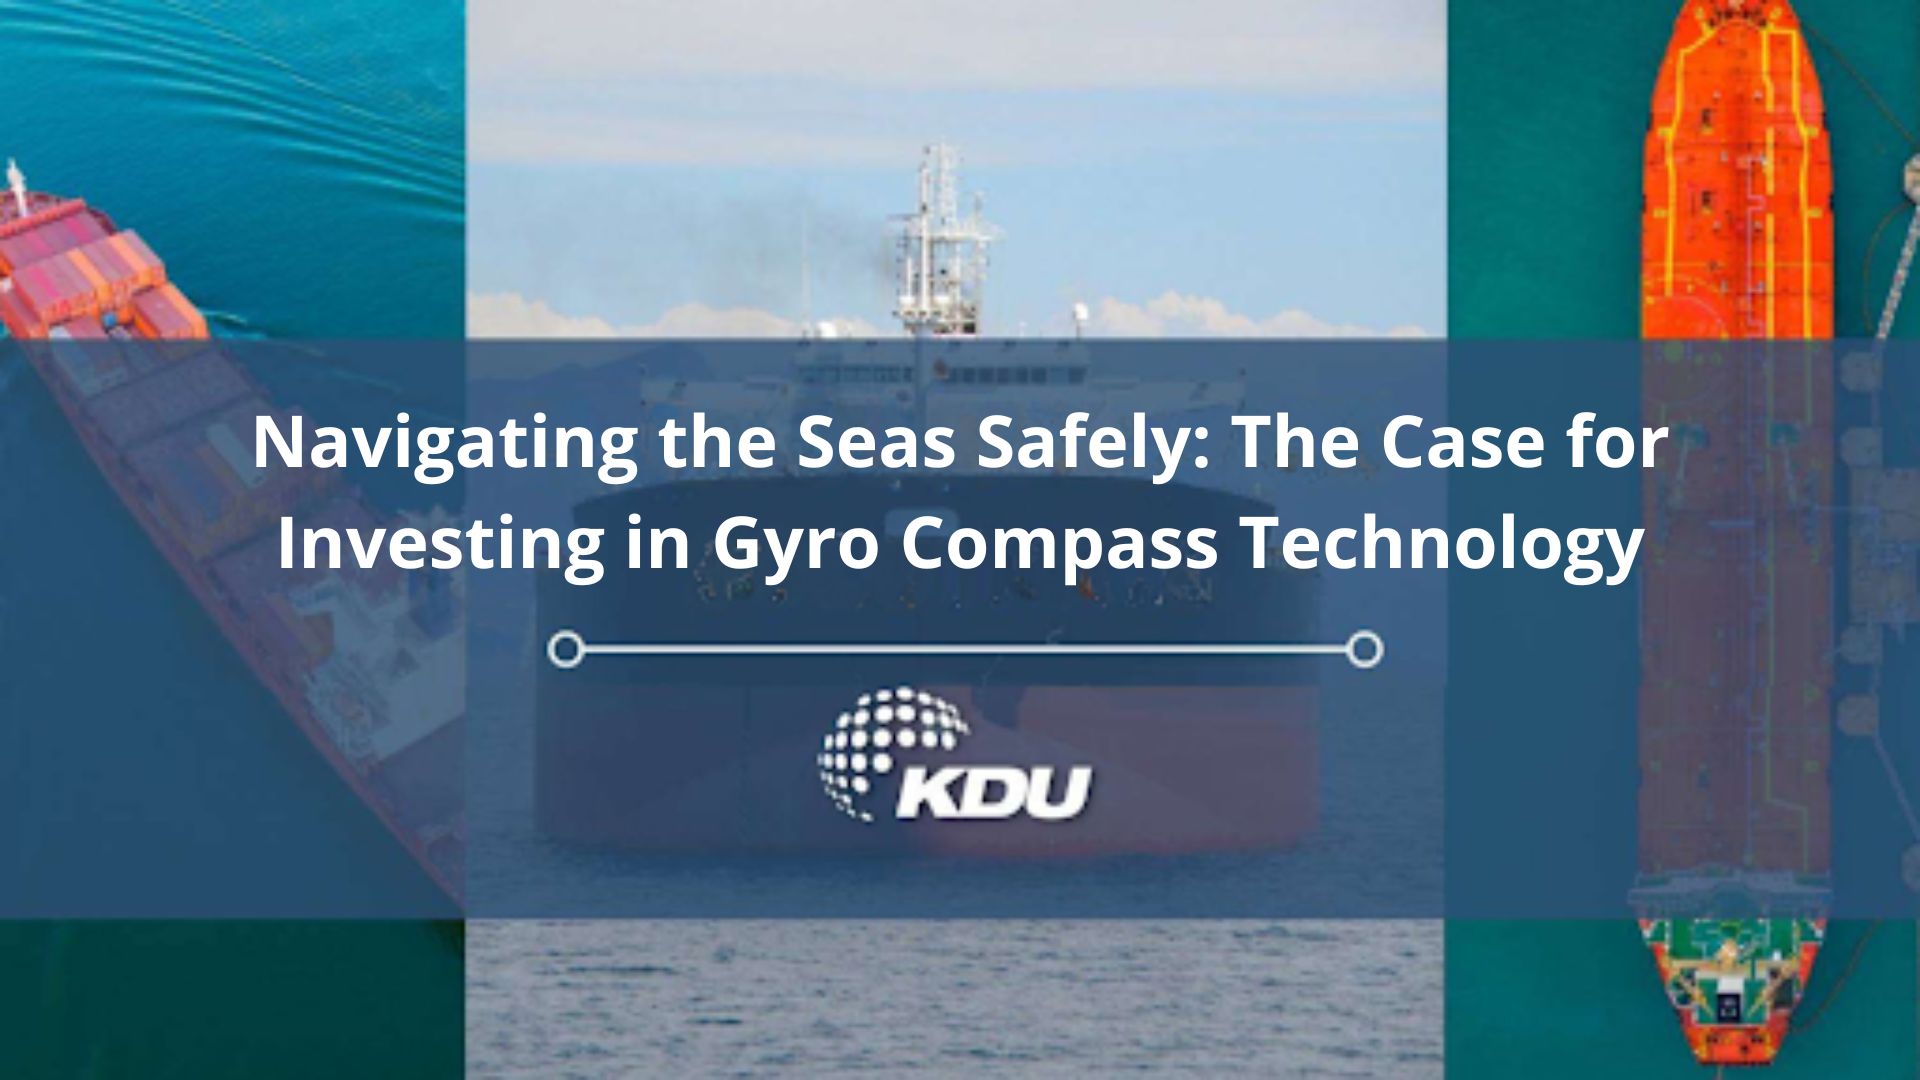 Navigating the Seas Safely The Case for Investing in Gyro Compass Technology